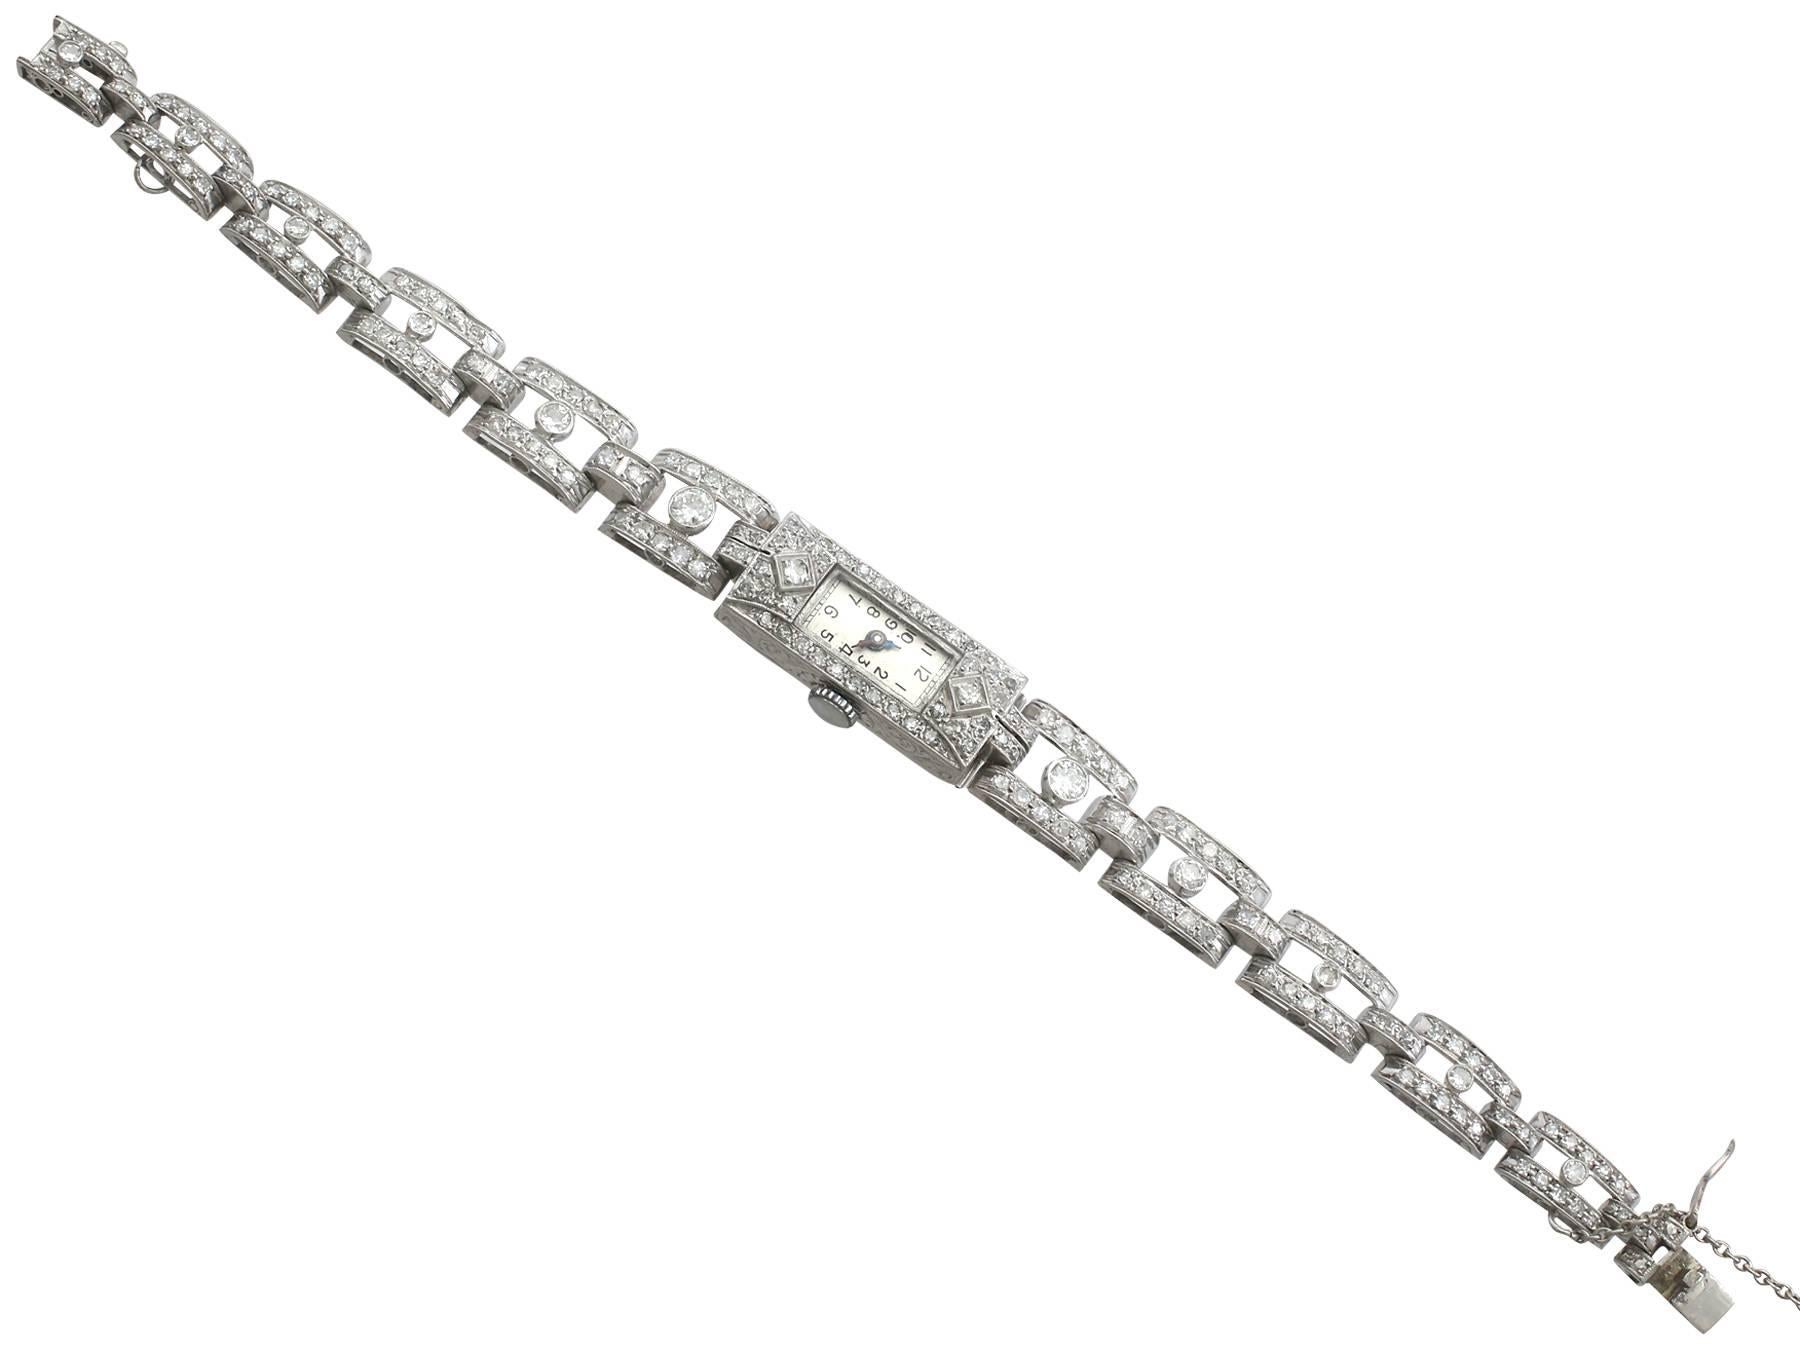 A stunning antique 130's 3.40 Ct diamond and platinum ladies manual wind cocktail watch; part of our diverse antique jewelry and estate jewelry collections.

This stunning, fine and impressive 1930's ladies diamond watch has been crafted in